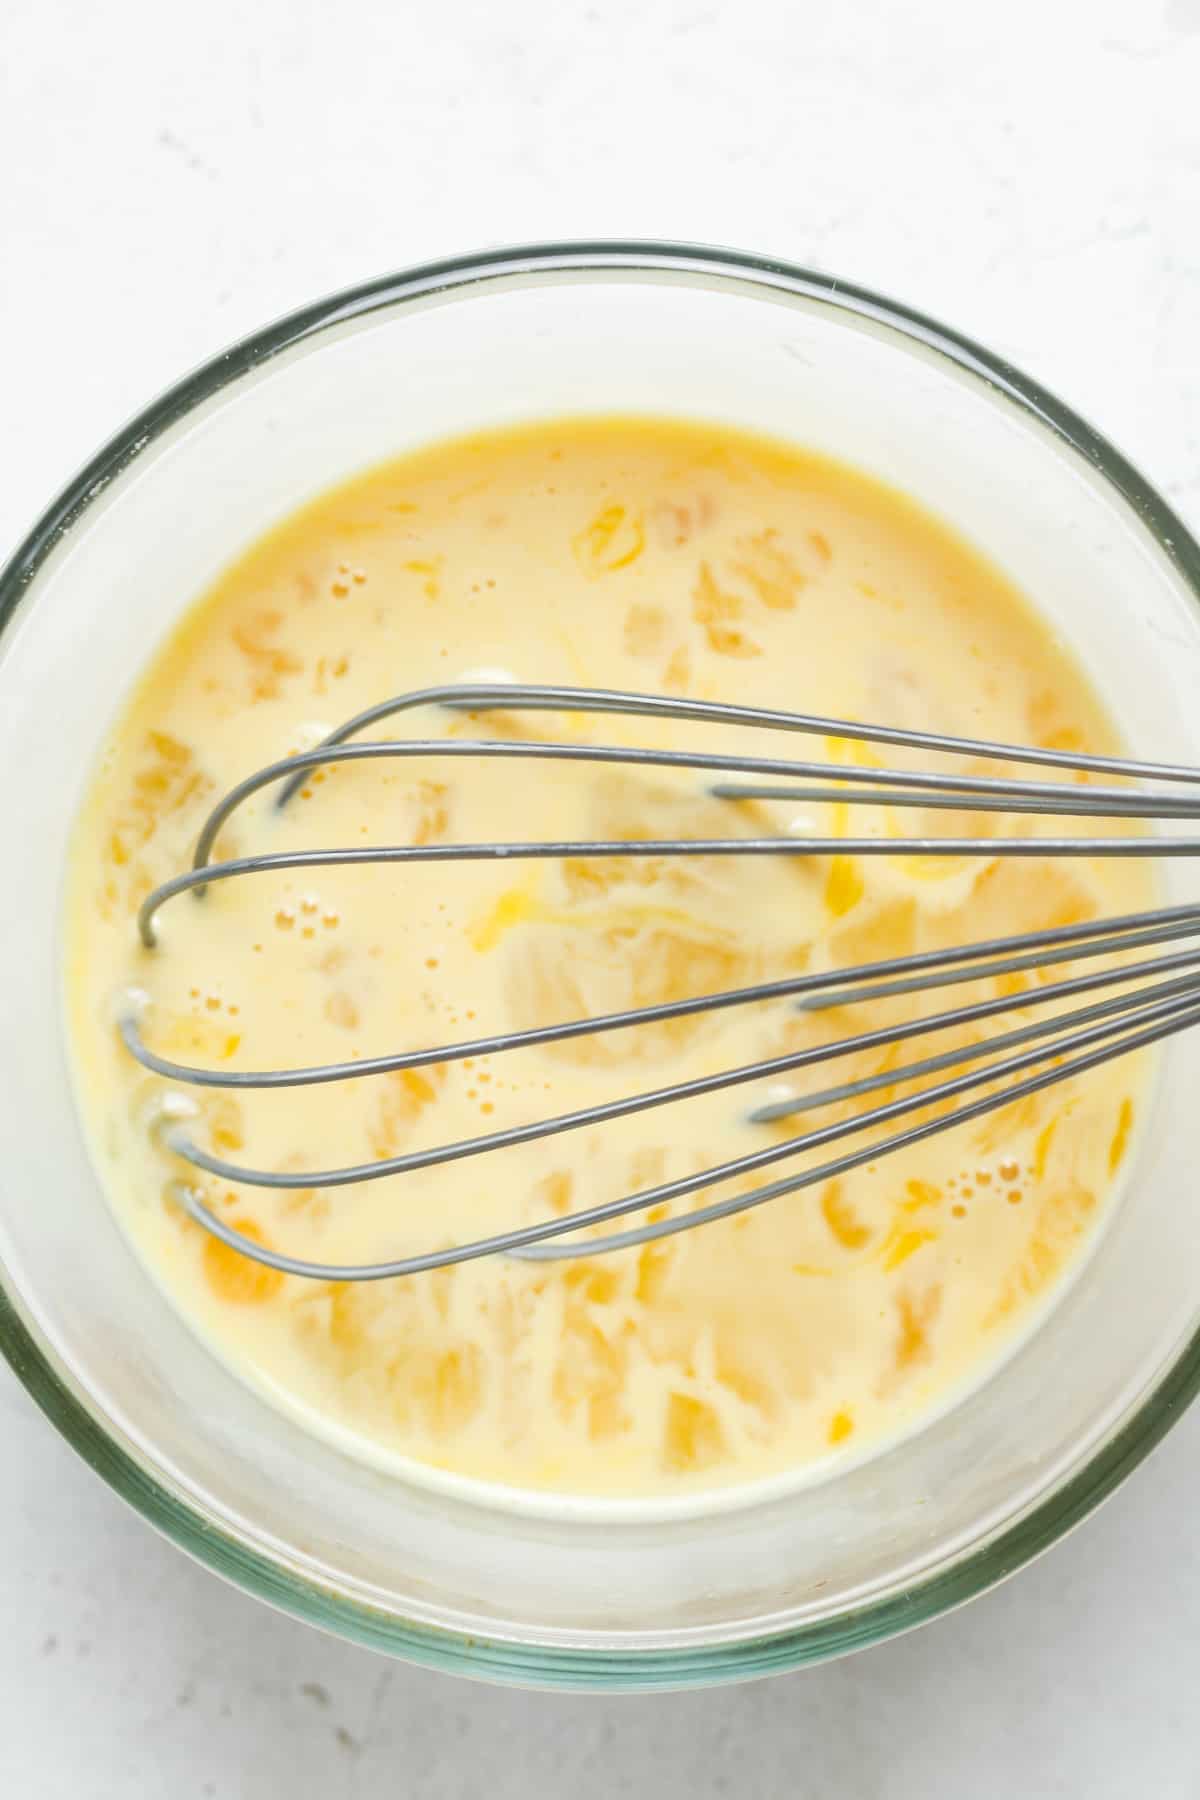 Whisked eggs in bowl.